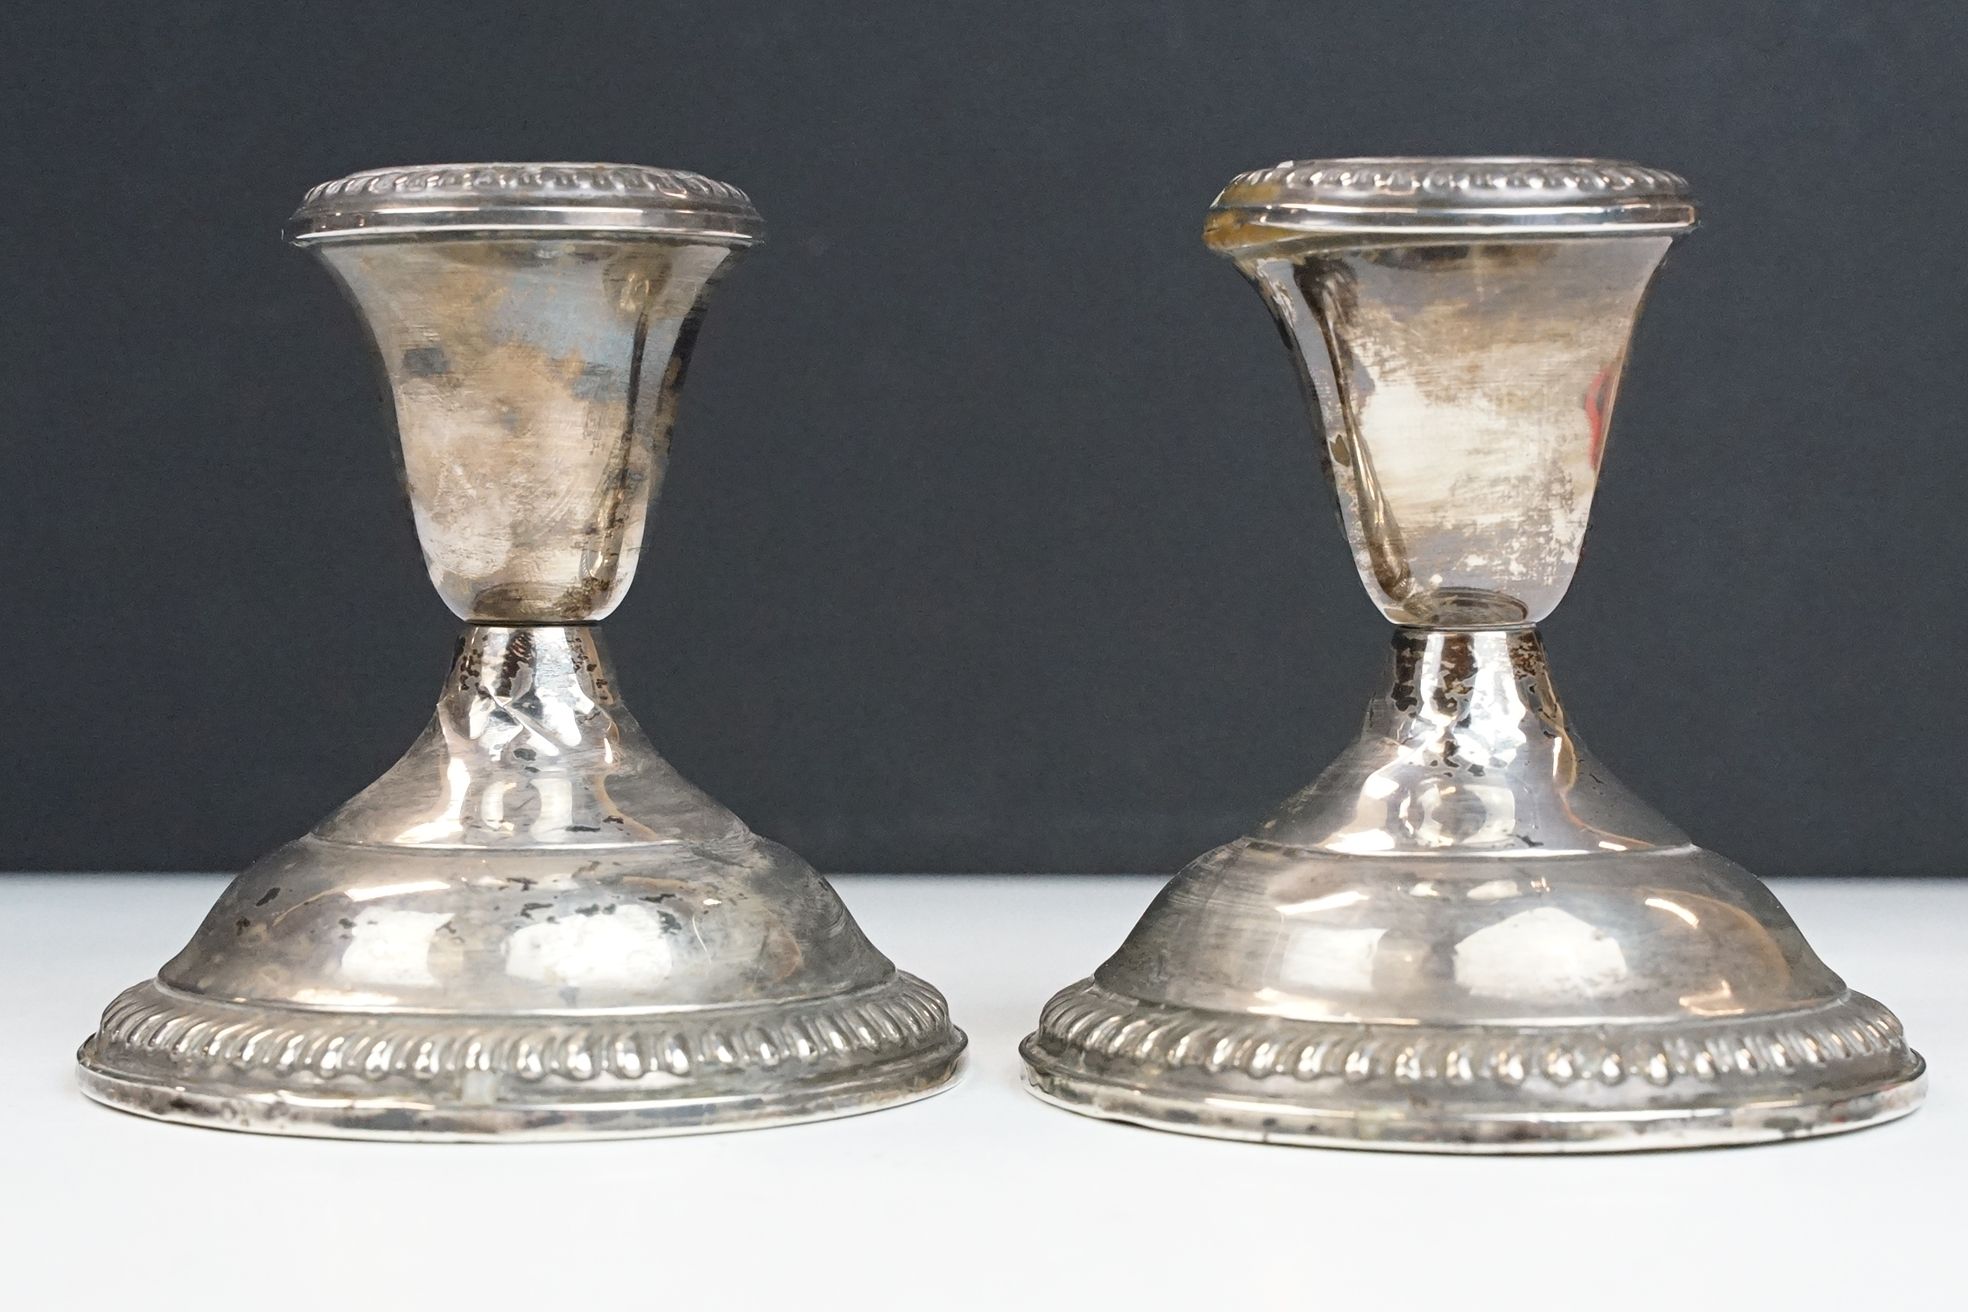 Pair of Empire Sterling weighted candle sticks with gadrooned borders together with a leather box - Image 6 of 9